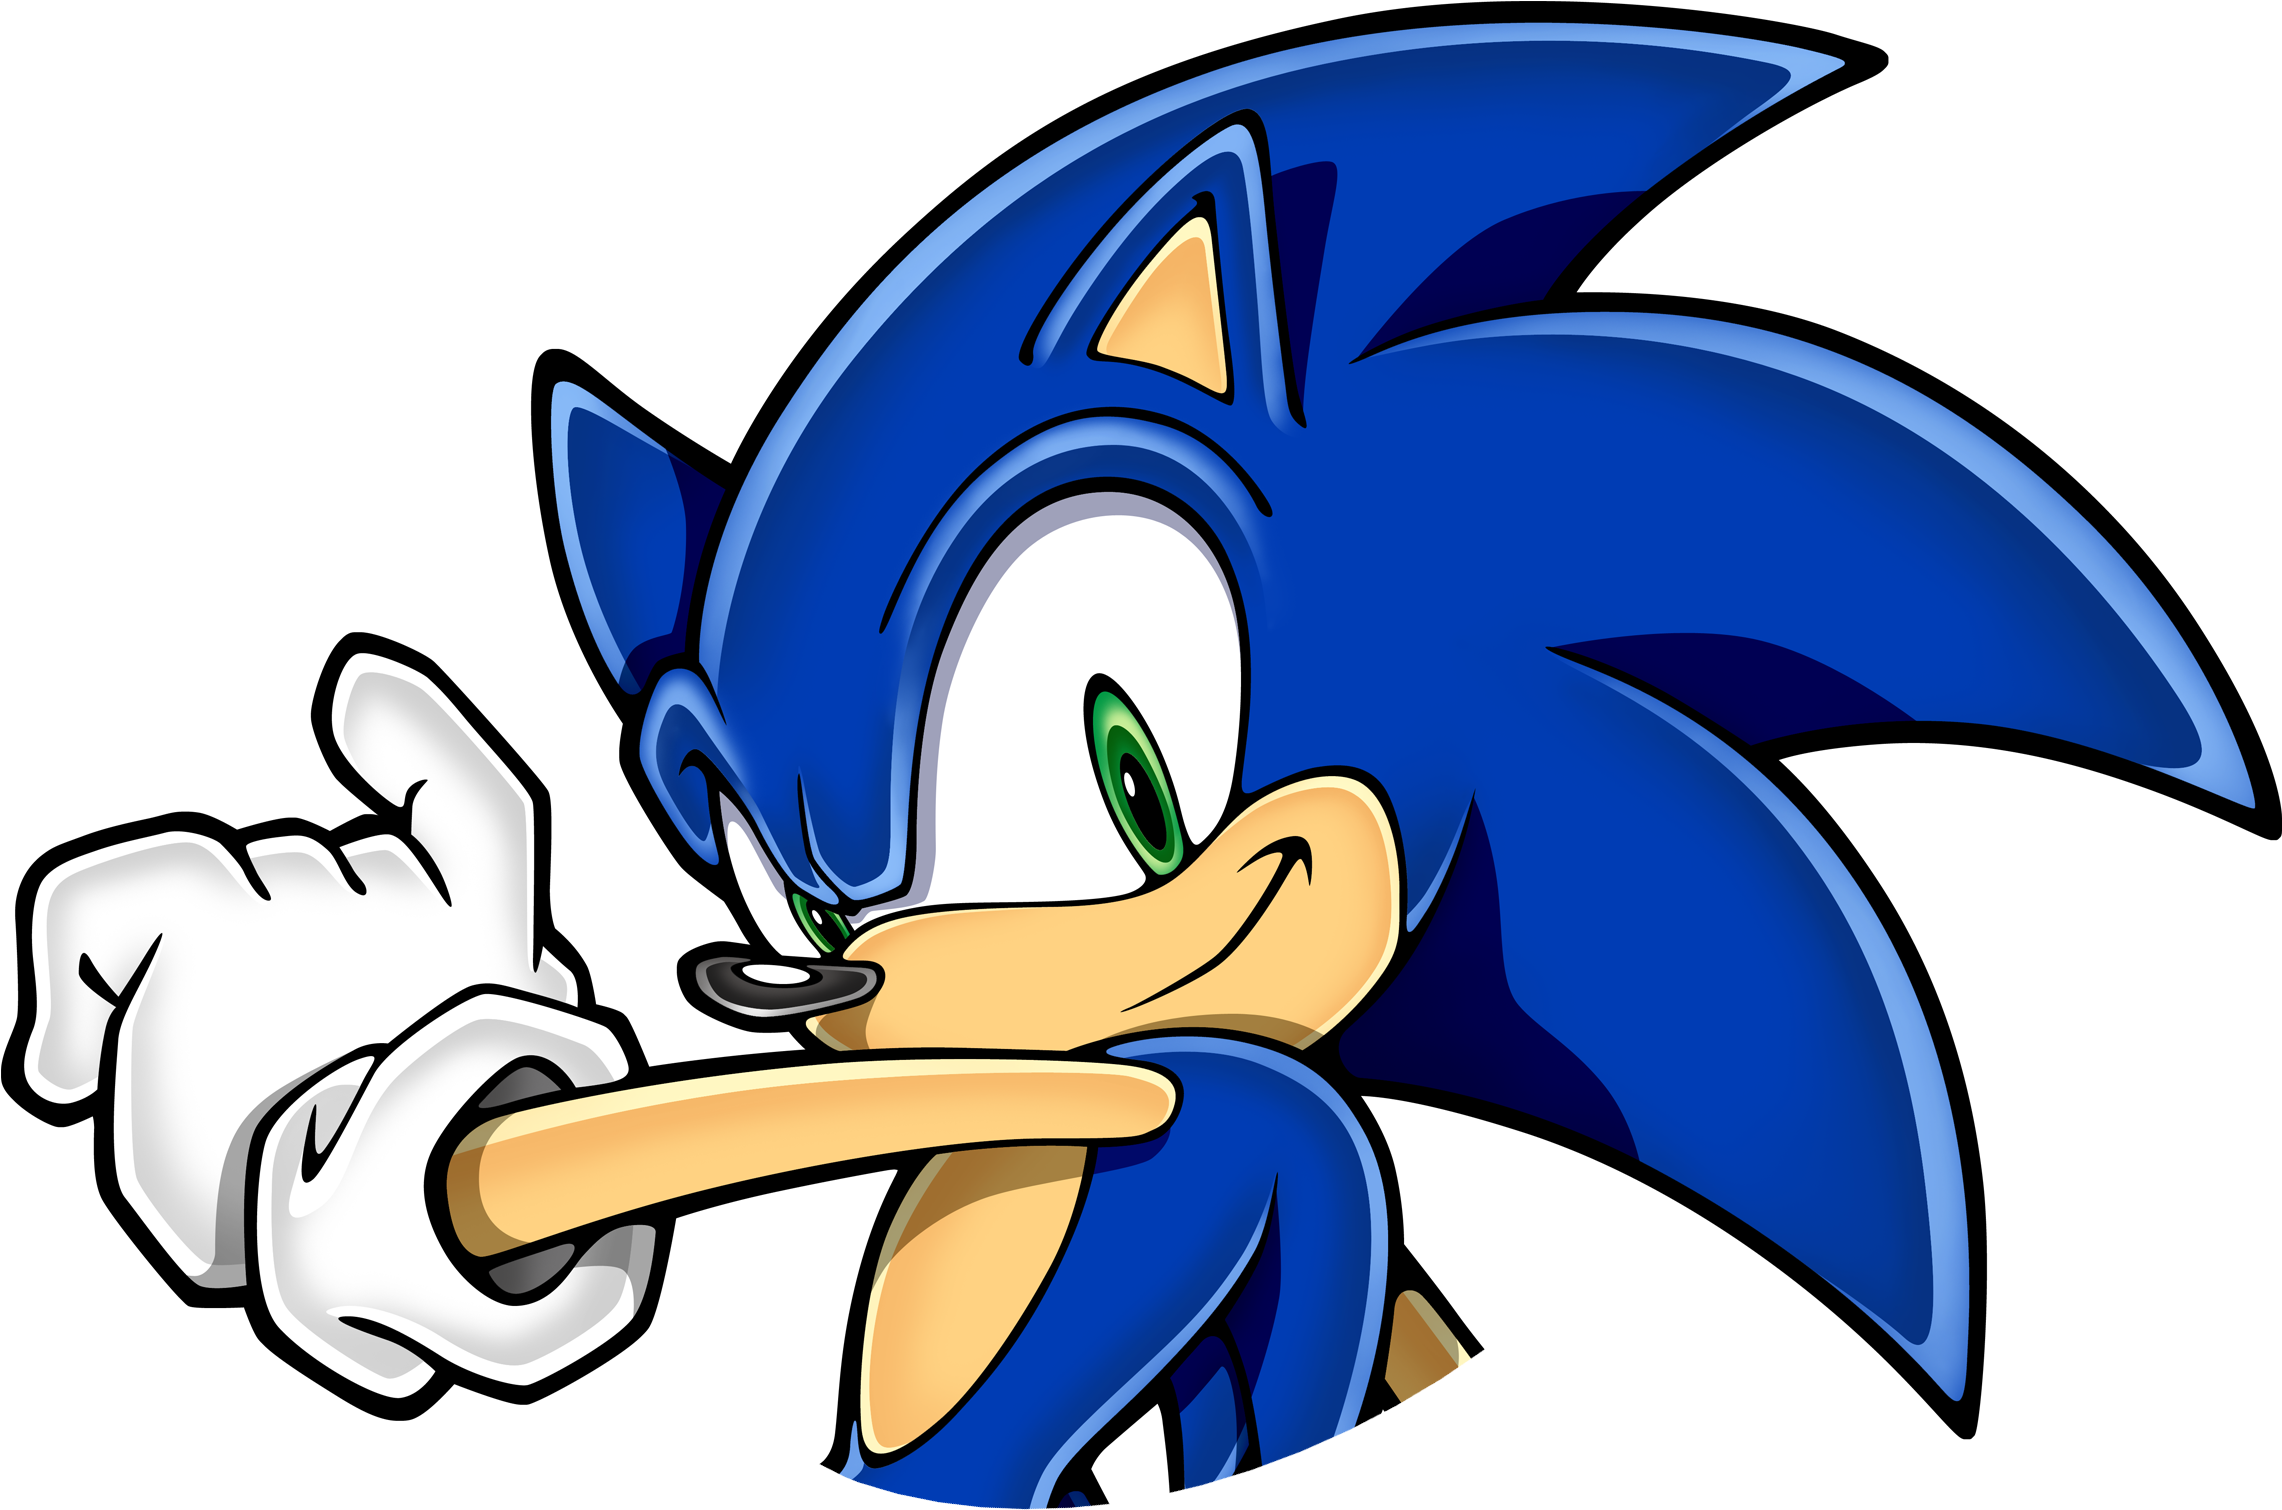 27 Nov - Sonic Classic Collection Ds - Free Transparent PNG Clipart Images  Download